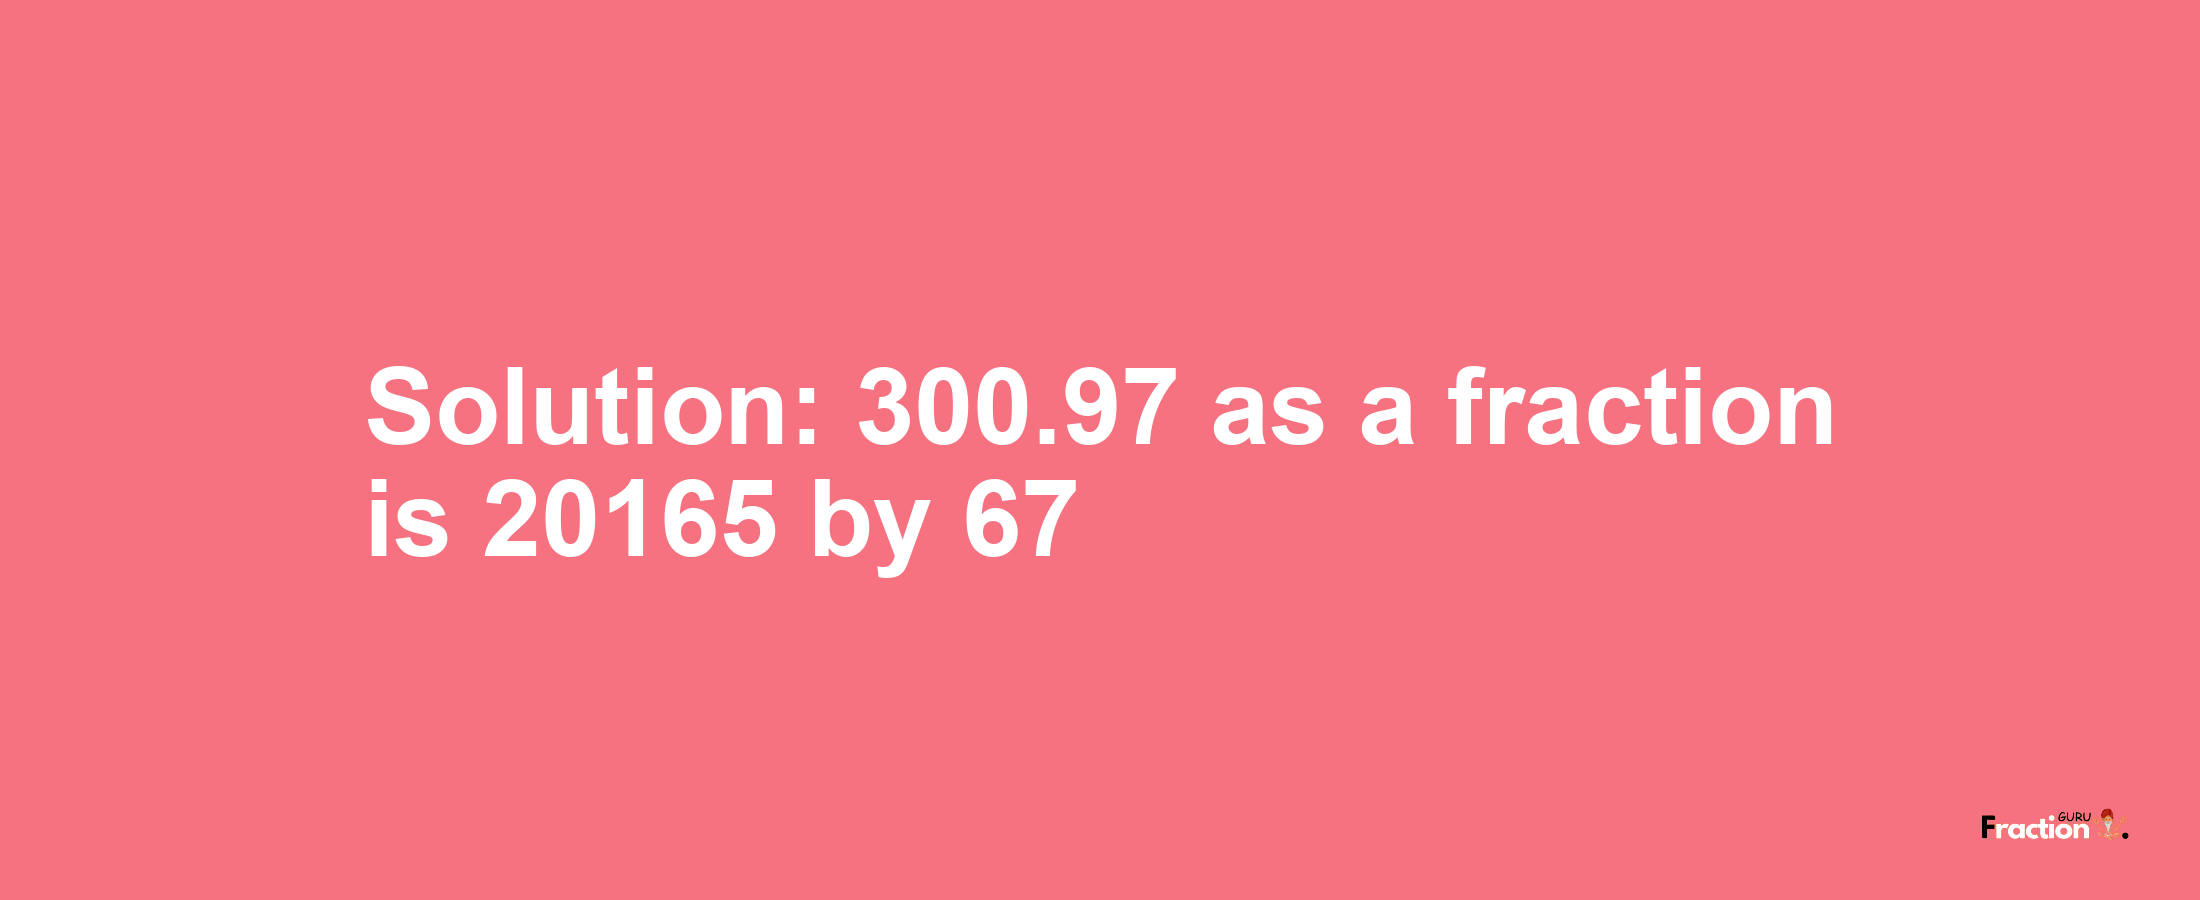 Solution:300.97 as a fraction is 20165/67